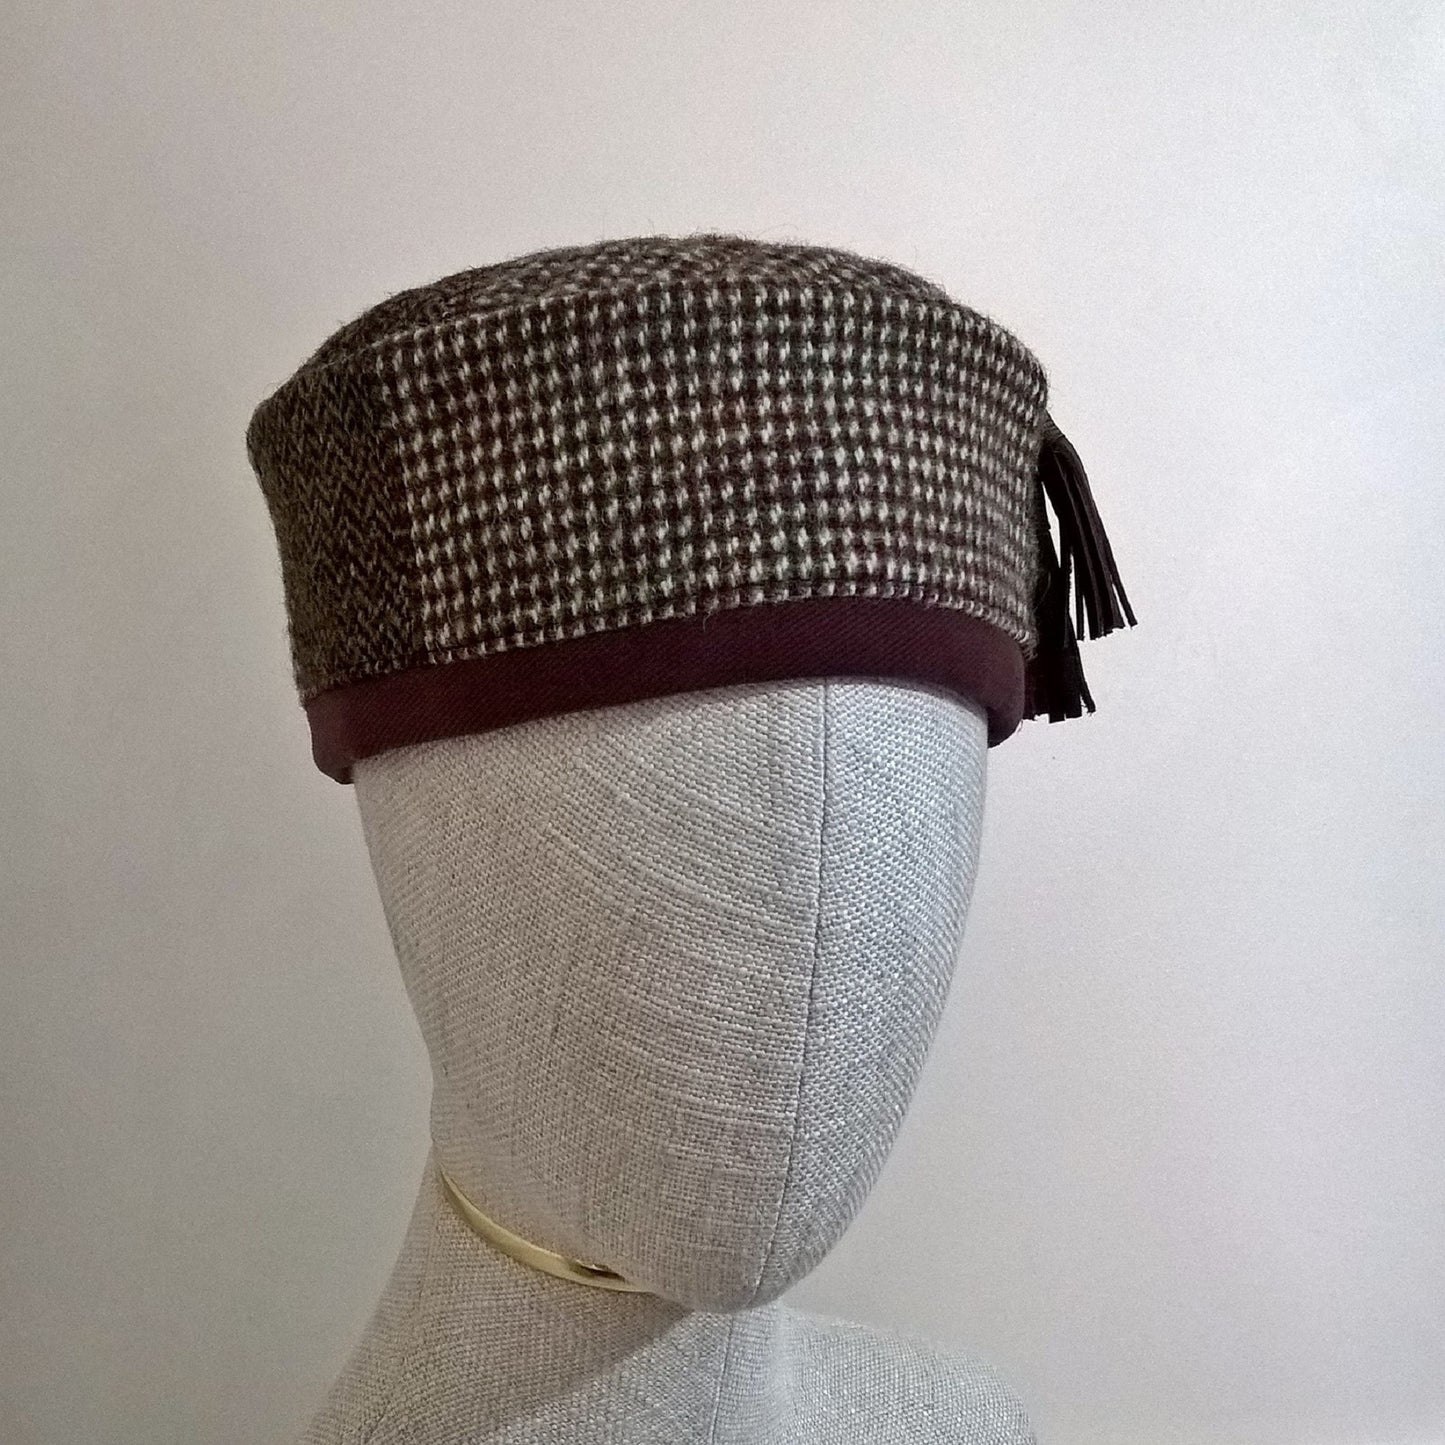 Harris Tweed wool smoking cap, in browns, cream and mauve shades, with leather tassel